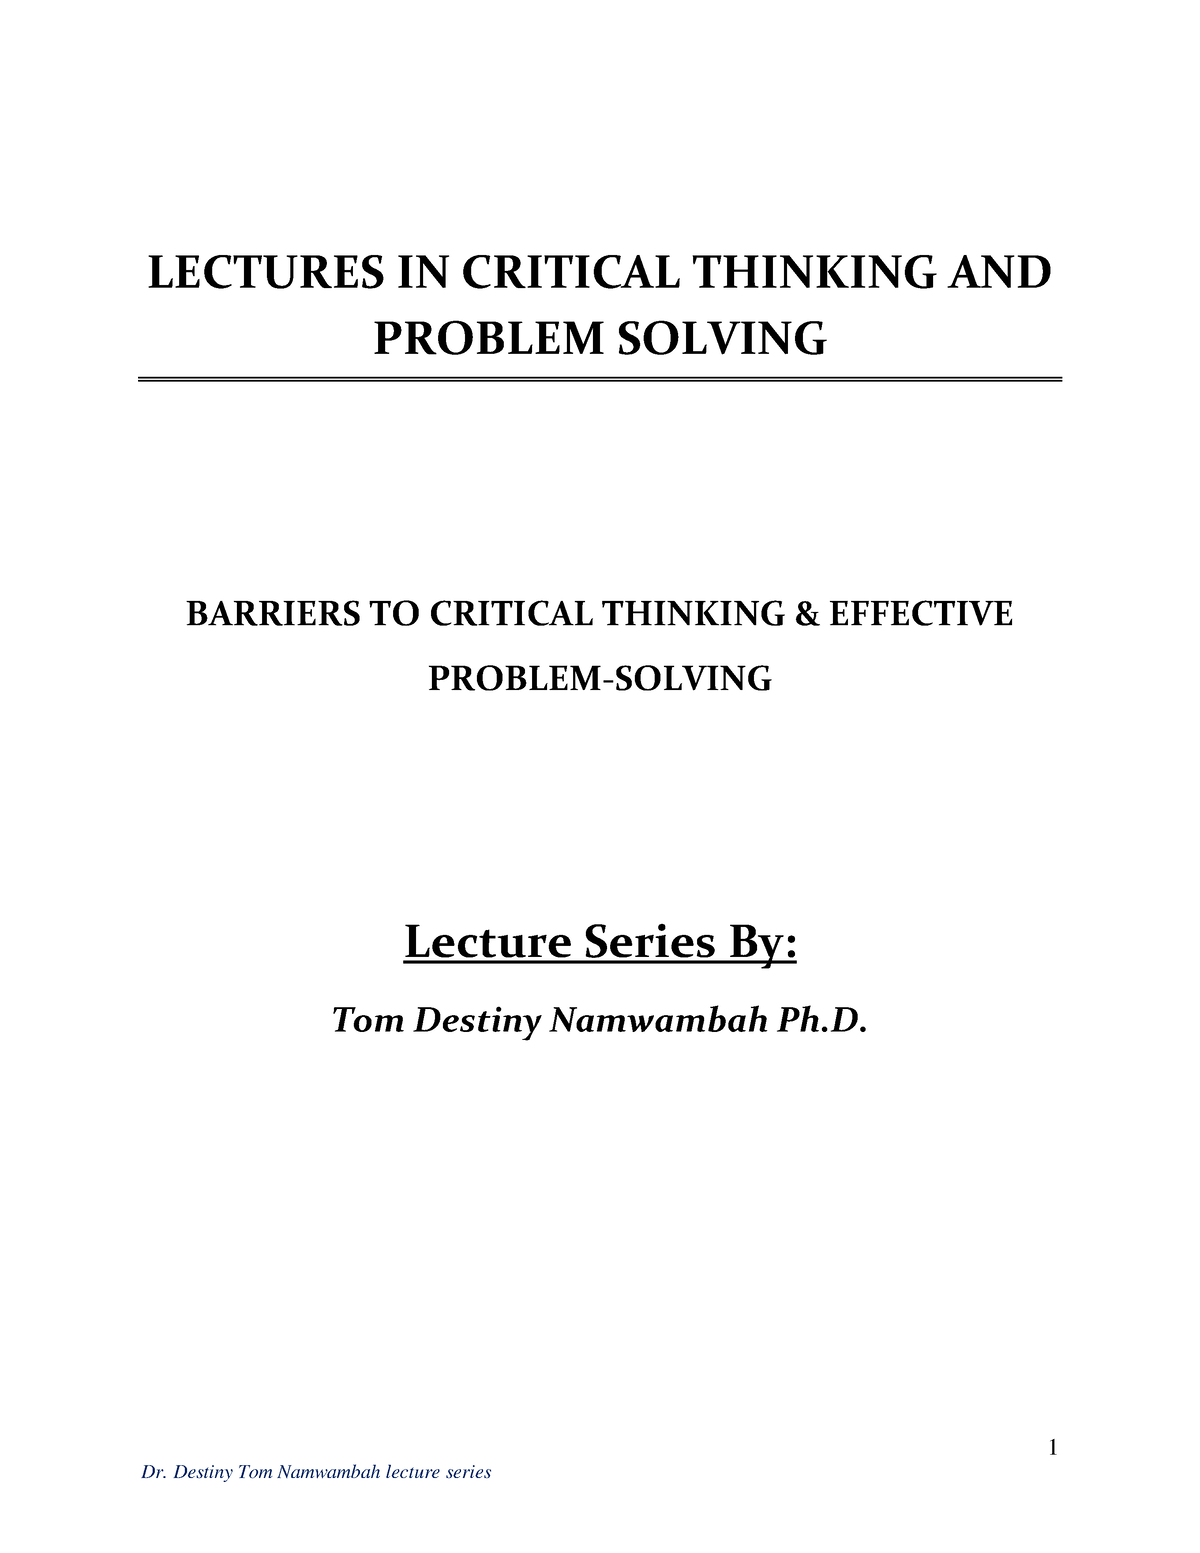 barriers to critical thinking and problem solving pdf